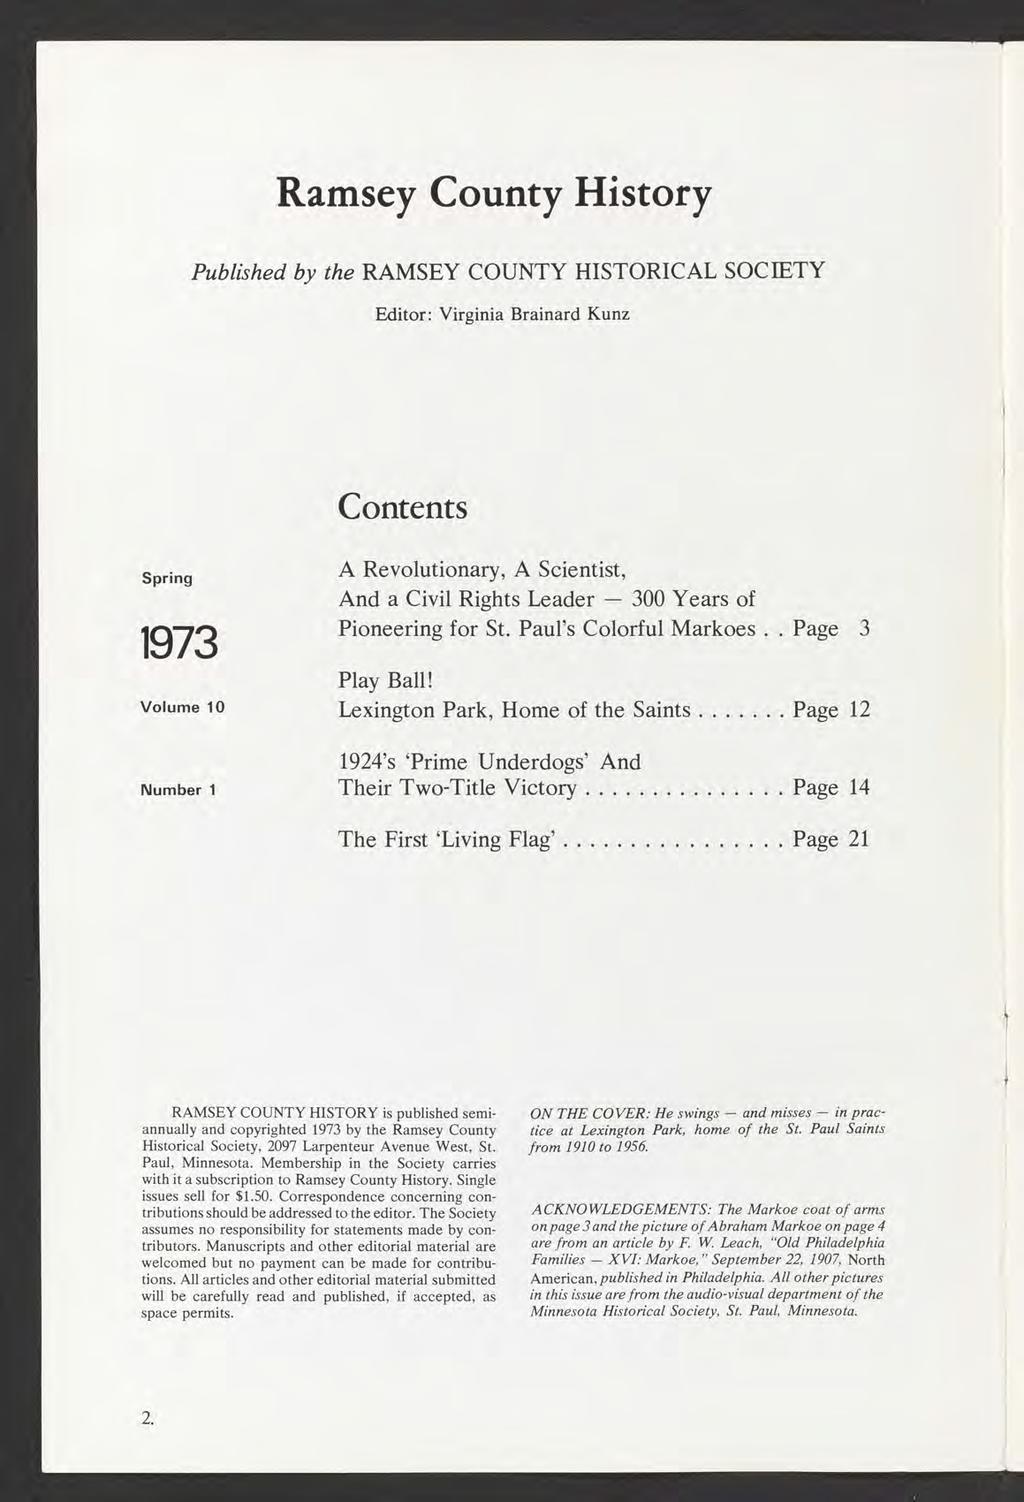 Ramsey County History Published by the RAMSEY COUNTY HISTORICAL SOCIETY Editor: Virginia Brainard Kunz Contents Spring 1973 Volume 10 Number 1 A Revolutionary, A Scientist, And a Civil Rights Leader